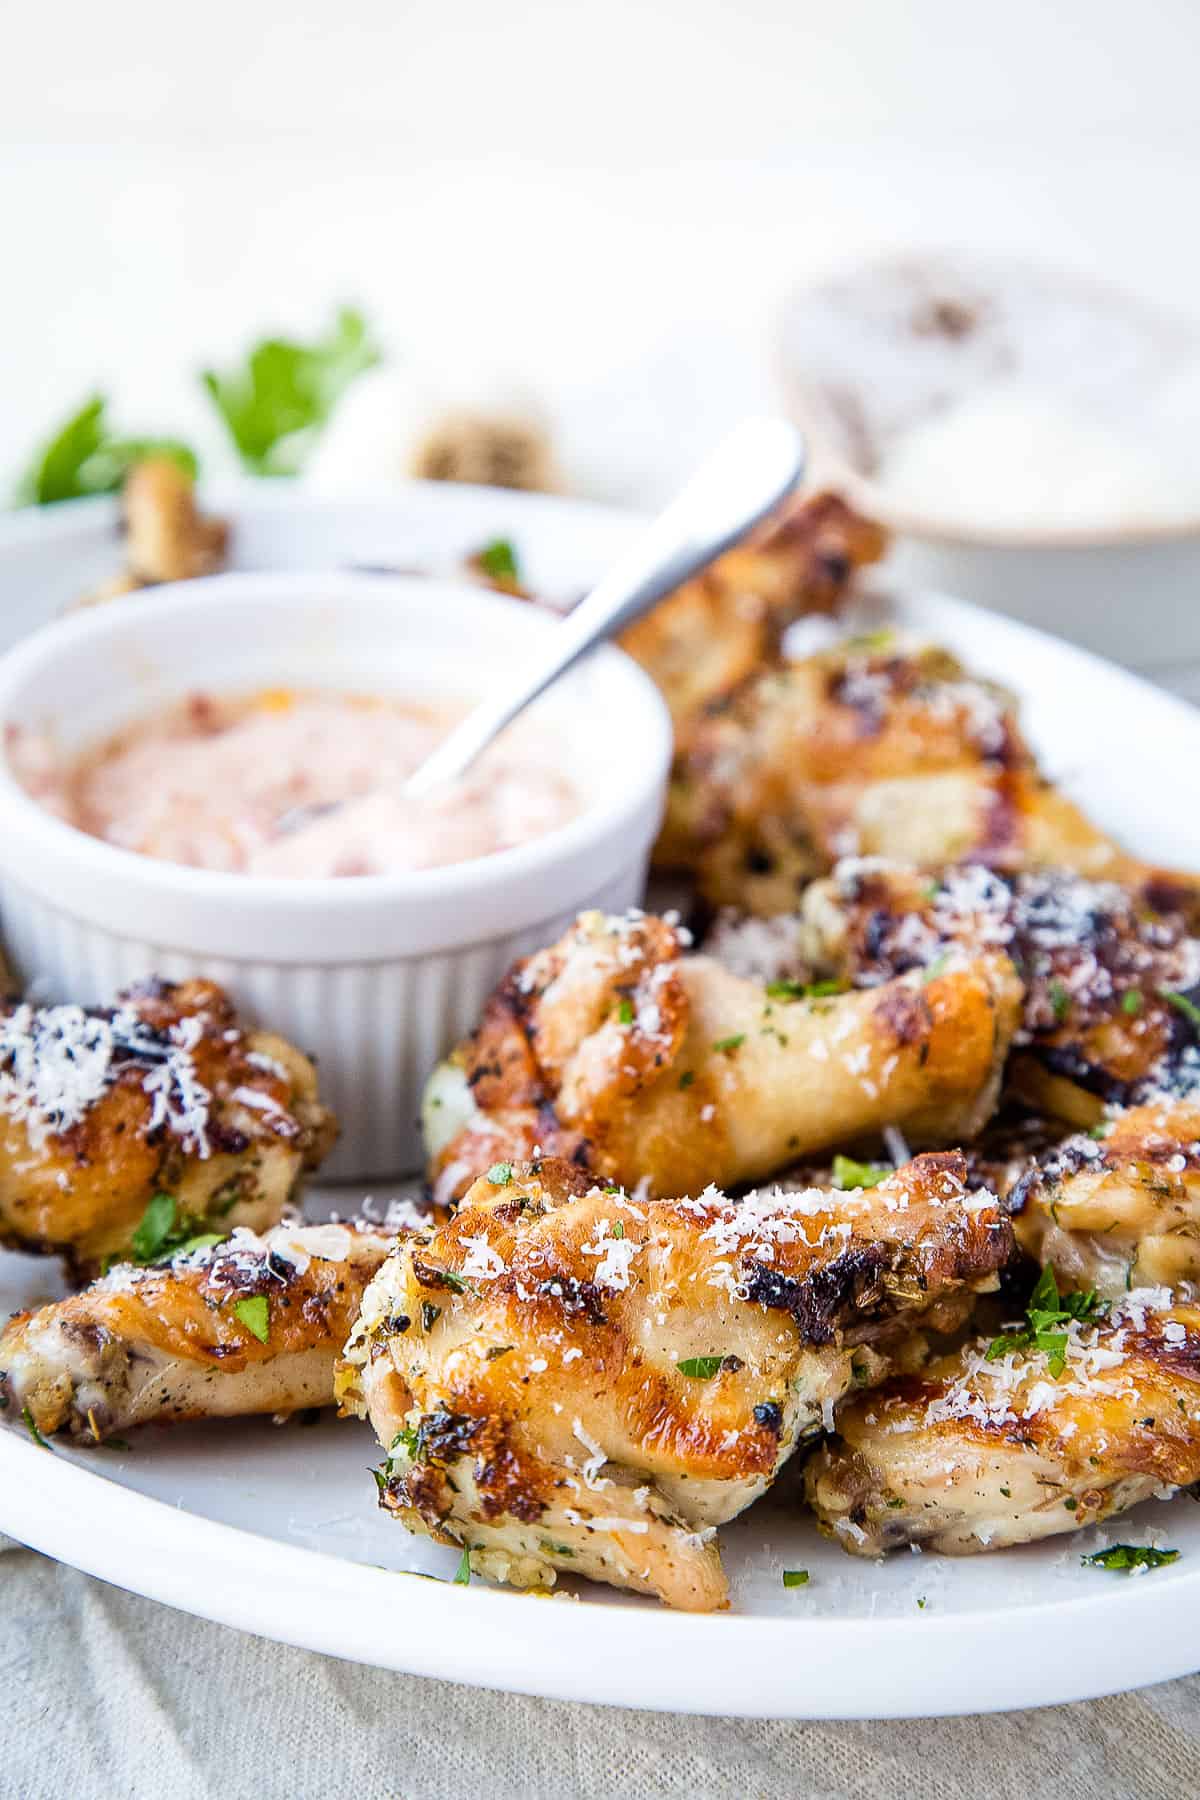 garlic and herb chicken wings on a white platter with a bowl of chipotle dipping sauce.